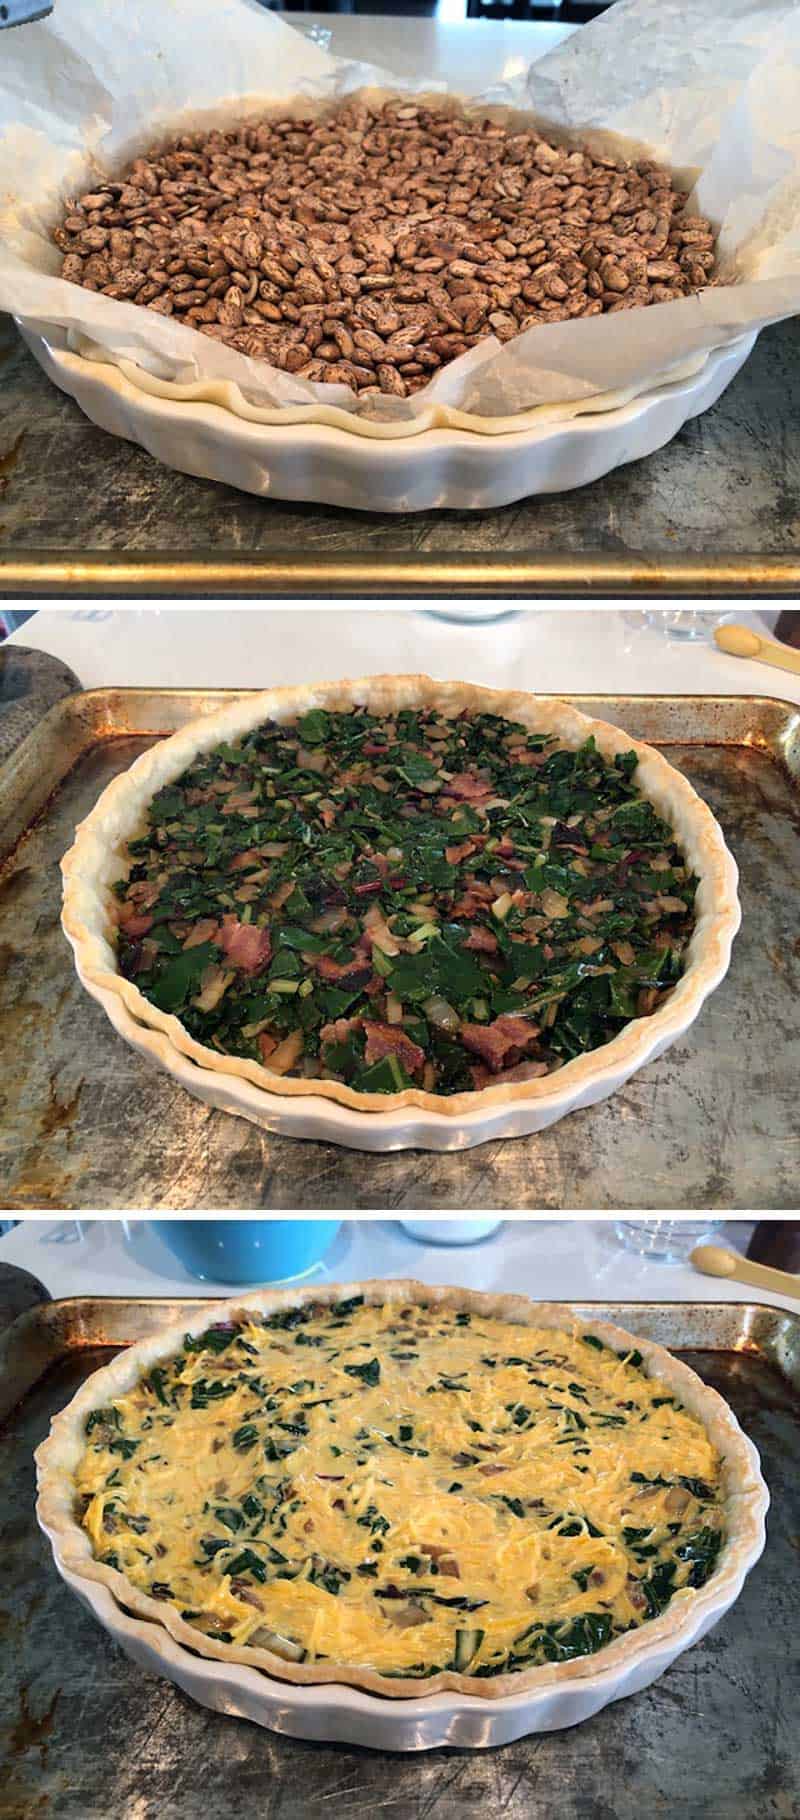 Process collage showing blind baking a pie crust for a quiche.